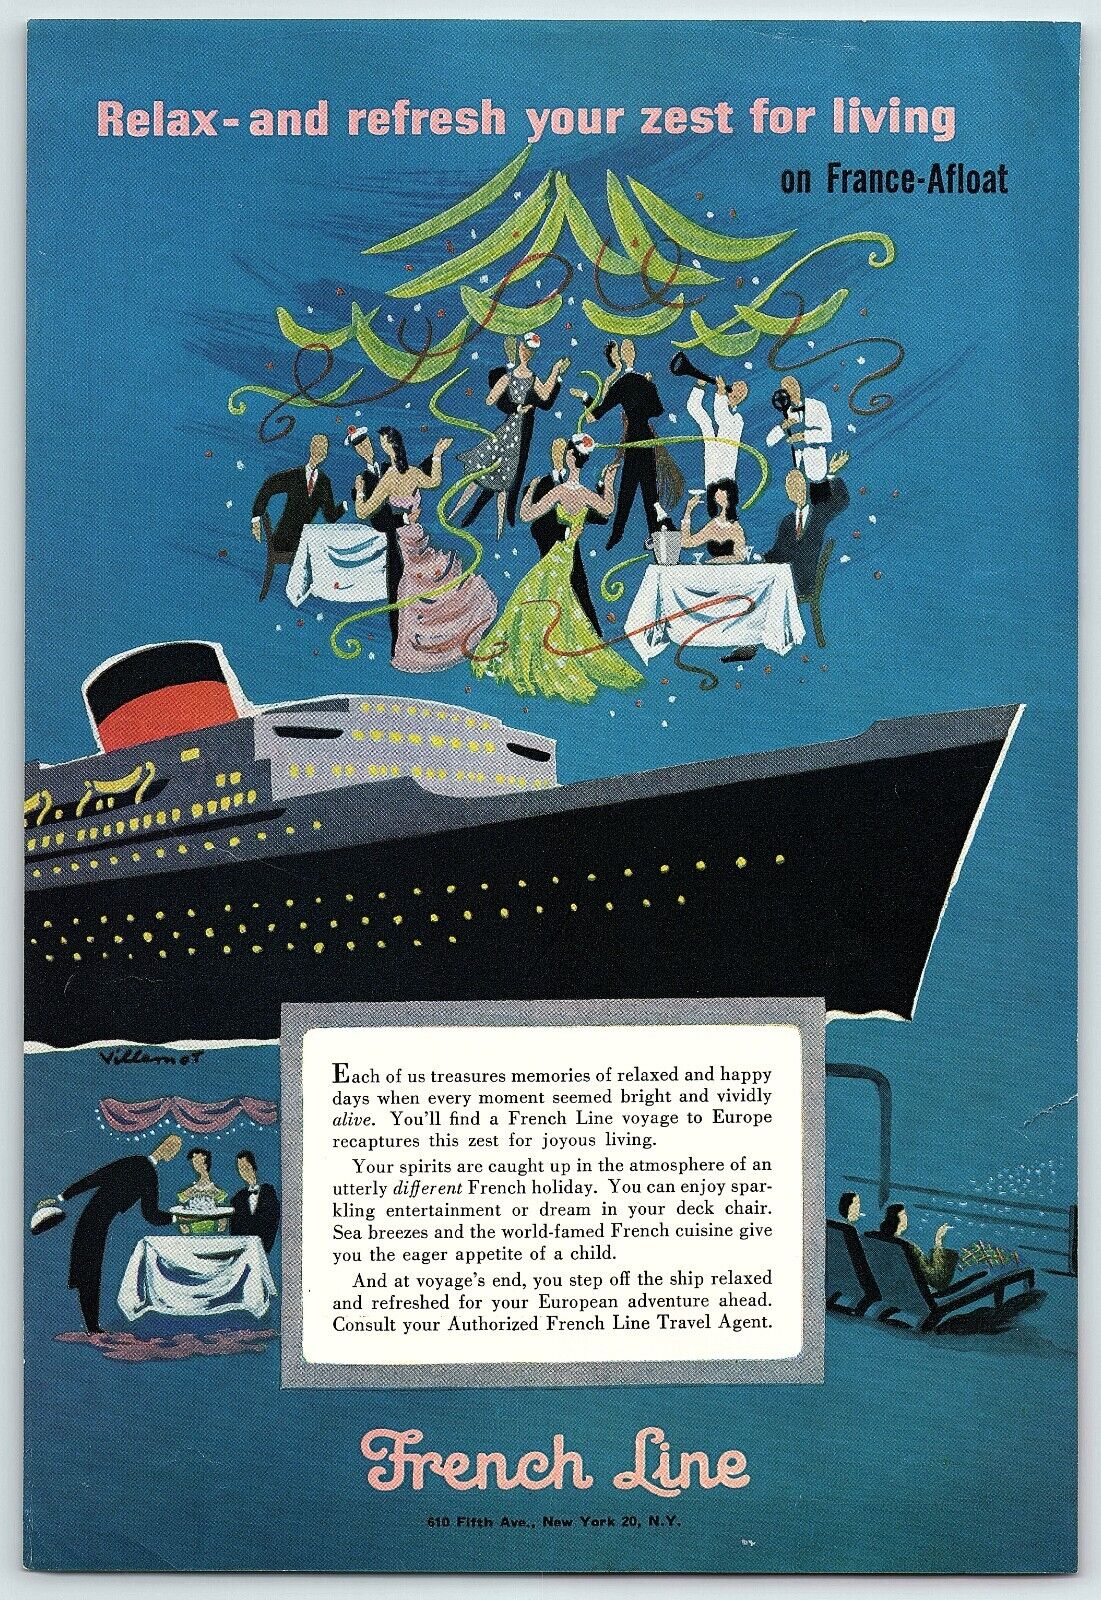 1950s FRENCH LINE CRUISE LINES FRANCE-AFLOAT ADVERTISEMENT Z1779